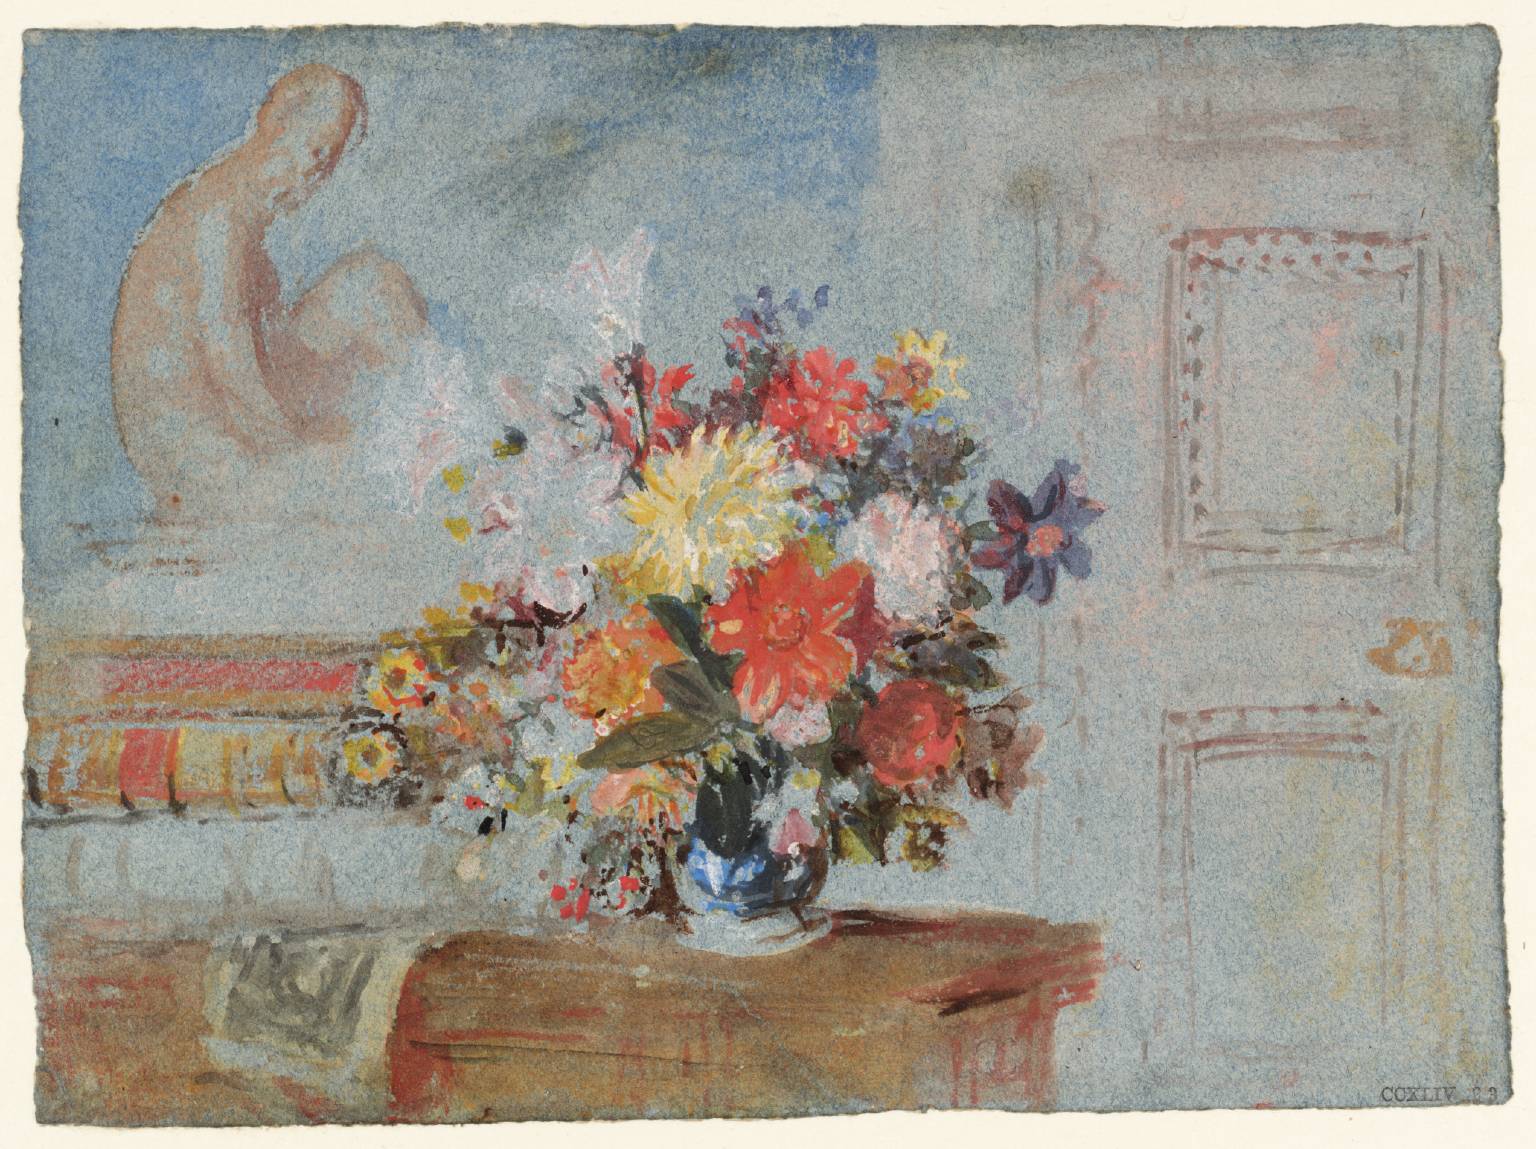 D22685: The Old Library: A Vase of Lilies, Dahlias and Other Flowers